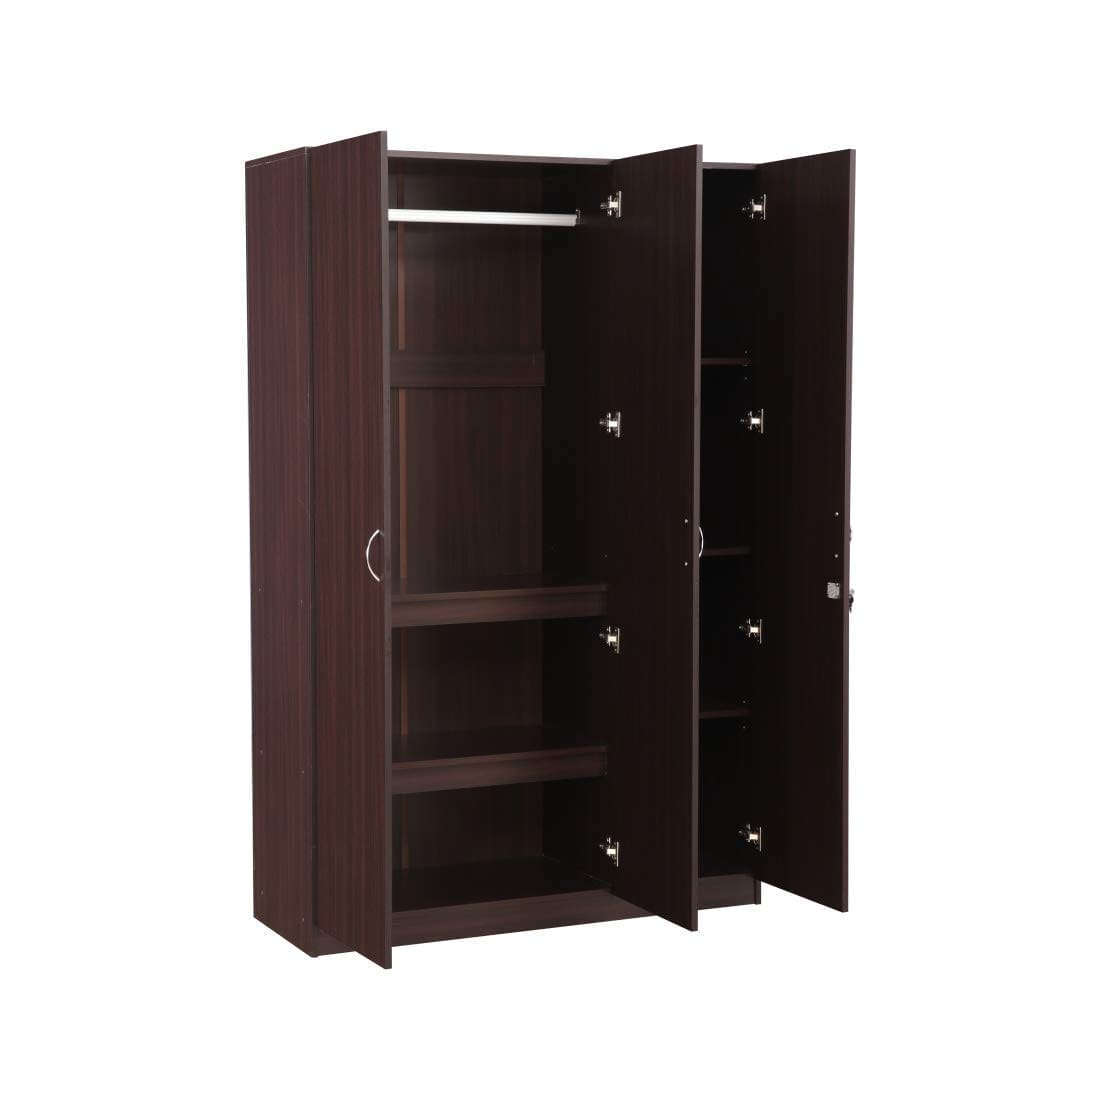 Walnut Colour 3 Door Wardrobe, Shelves and Hanging Space for Clothes | Wardrobe for Clothes | Cupboard | Almirah | Engineered Wooden Cupboard | Home Storage